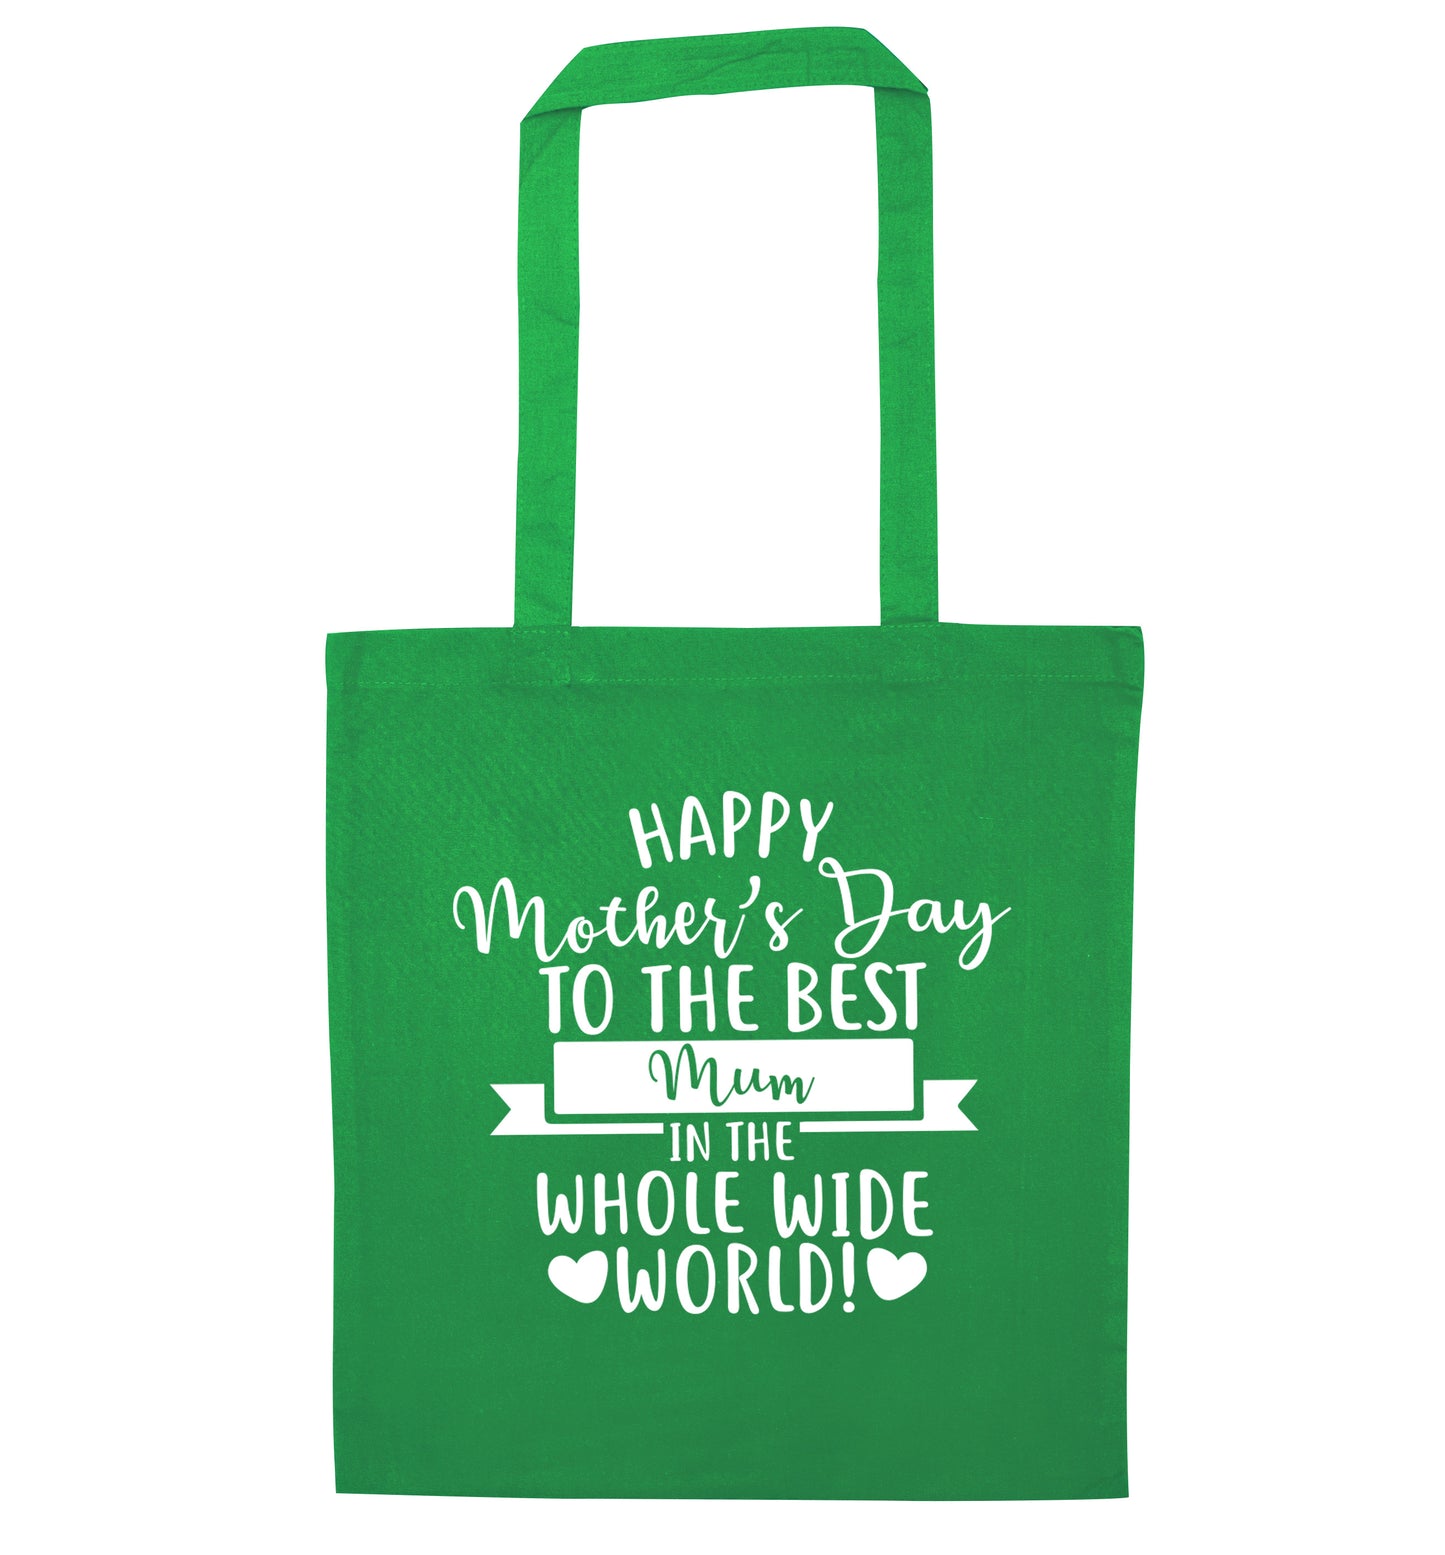 Happy Mother's Day to the best mum in the whole wide world! green tote bag